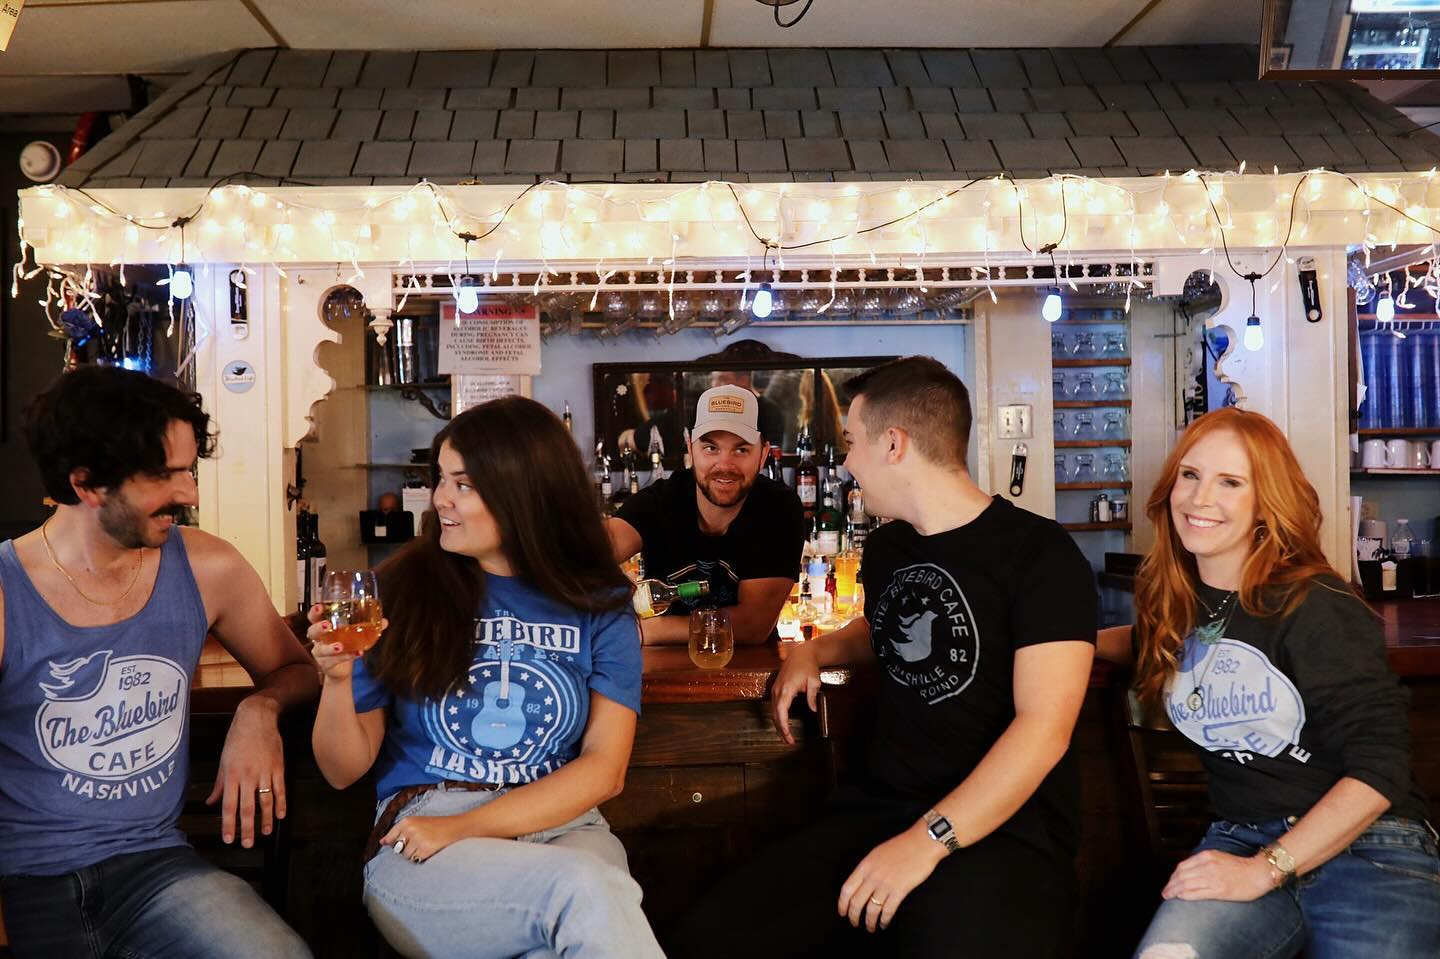 Have you ever wanted to work at The Bluebird Cafe? We’re hiring! Check out the link in our bio for open positions. Serio